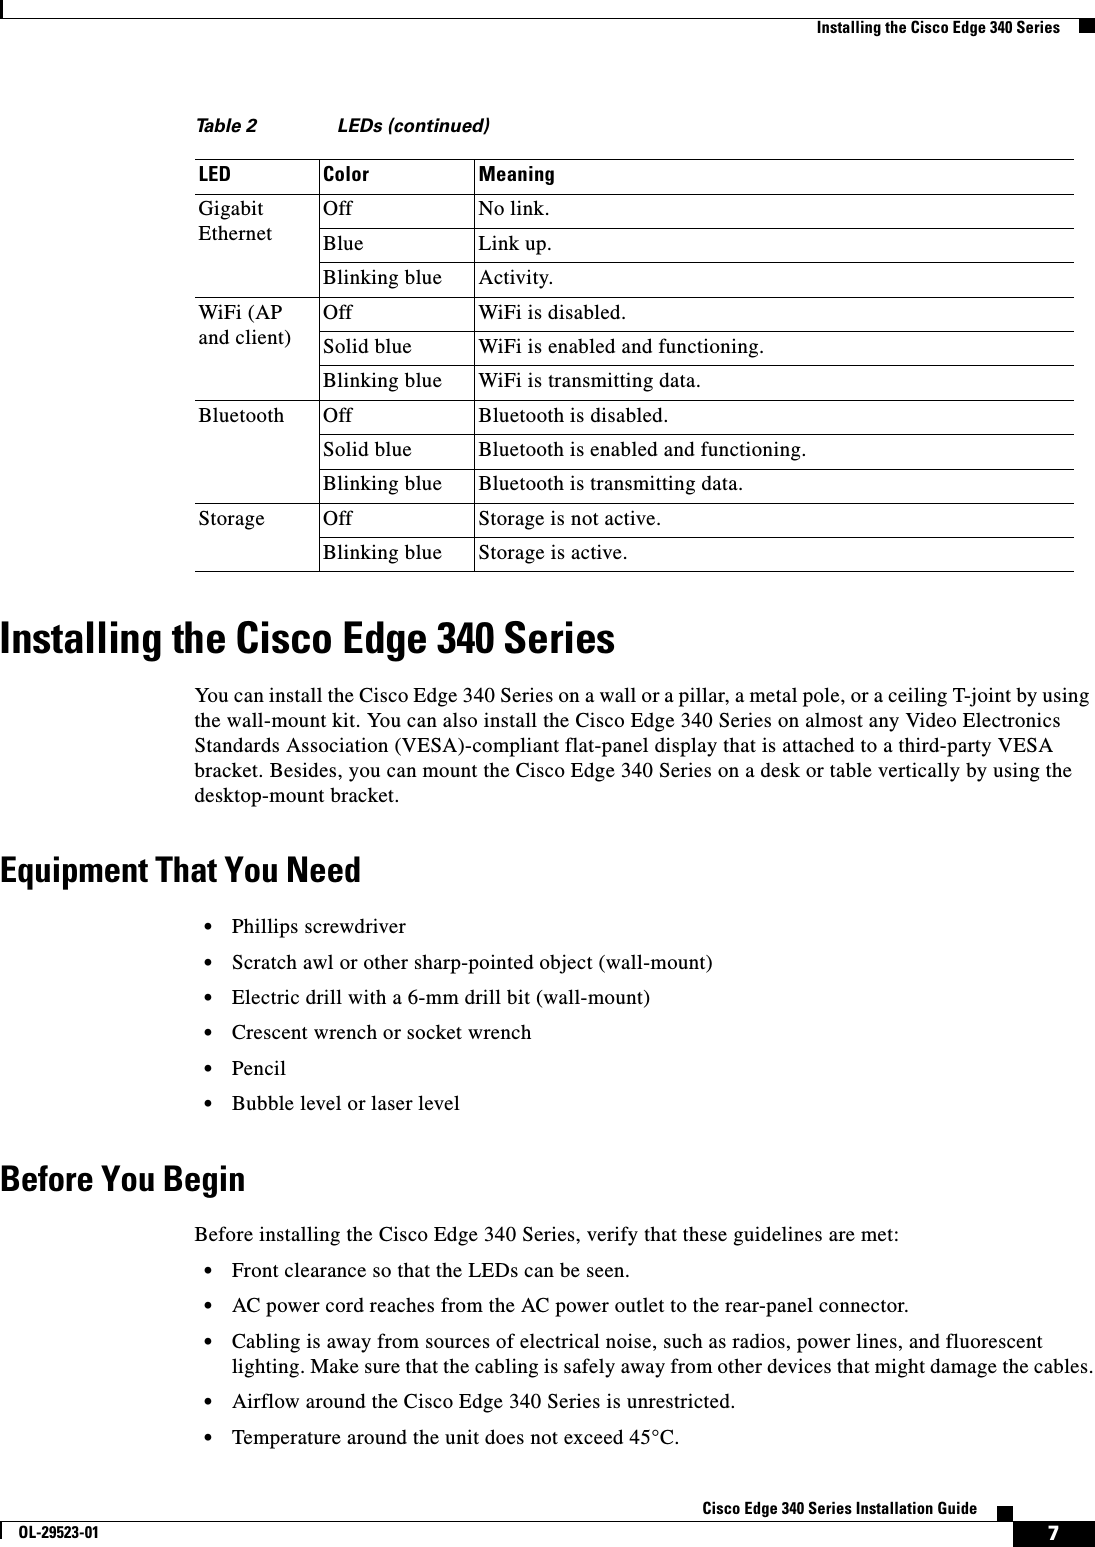  7Cisco Edge 340 Series Installation GuideOL-29523-01Installing the Cisco Edge 340 SeriesInstalling the Cisco Edge 340 SeriesYou can install the Cisco Edge 340 Series on a wall or a pillar, a metal pole, or a ceiling T-joint by using the wall-mount kit. You can also install the Cisco Edge 340 Series on almost any Video Electronics Standards Association (VESA)-compliant flat-panel display that is attached to a third-party VESA bracket. Besides, you can mount the Cisco Edge 340 Series on a desk or table vertically by using the desktop-mount bracket. Equipment That You Need  • Phillips screwdriver   • Scratch awl or other sharp-pointed object (wall-mount)  • Electric drill with a 6-mm drill bit (wall-mount)  • Crescent wrench or socket wrench • Pencil  • Bubble level or laser levelBefore You BeginBefore installing the Cisco Edge 340 Series, verify that these guidelines are met:  • Front clearance so that the LEDs can be seen.  • AC power cord reaches from the AC power outlet to the rear-panel connector.  • Cabling is away from sources of electrical noise, such as radios, power lines, and fluorescent lighting. Make sure that the cabling is safely away from other devices that might damage the cables.  • Airflow around the Cisco Edge 340 Series is unrestricted.  • Temperature around the unit does not exceed 45°C. Gigabit EthernetOff No link.Blue Link up.Blinking blue Activity.WiFi (AP and client)Off WiFi is disabled.Solid blue WiFi is enabled and functioning.Blinking blue WiFi is transmitting data.Bluetooth Off Bluetooth is disabled.Solid blue Bluetooth is enabled and functioning.Blinking blue Bluetooth is transmitting data.Storage Off Storage is not active.Blinking blue Storage is active.Table 2 LEDs (continued)LED Color Meaning